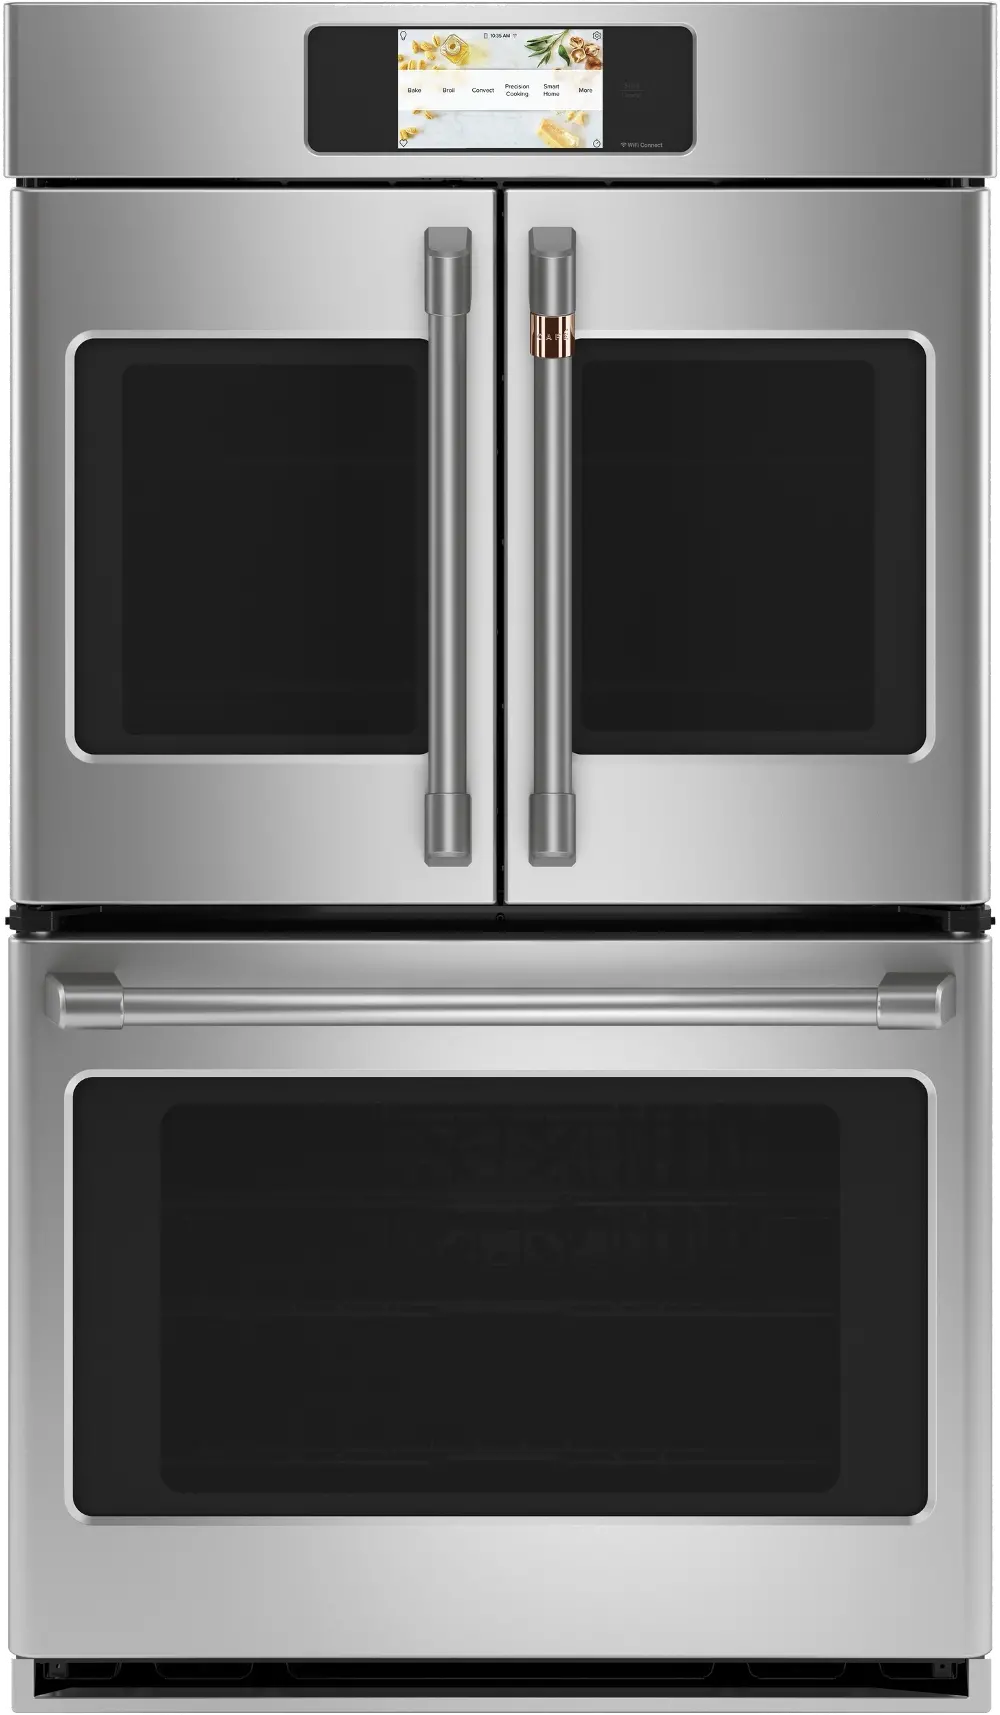 CTD90FP2NS1 Cafe Professional 10 cu ft Double Wall Oven - Stainless Steel 30 Inch-1